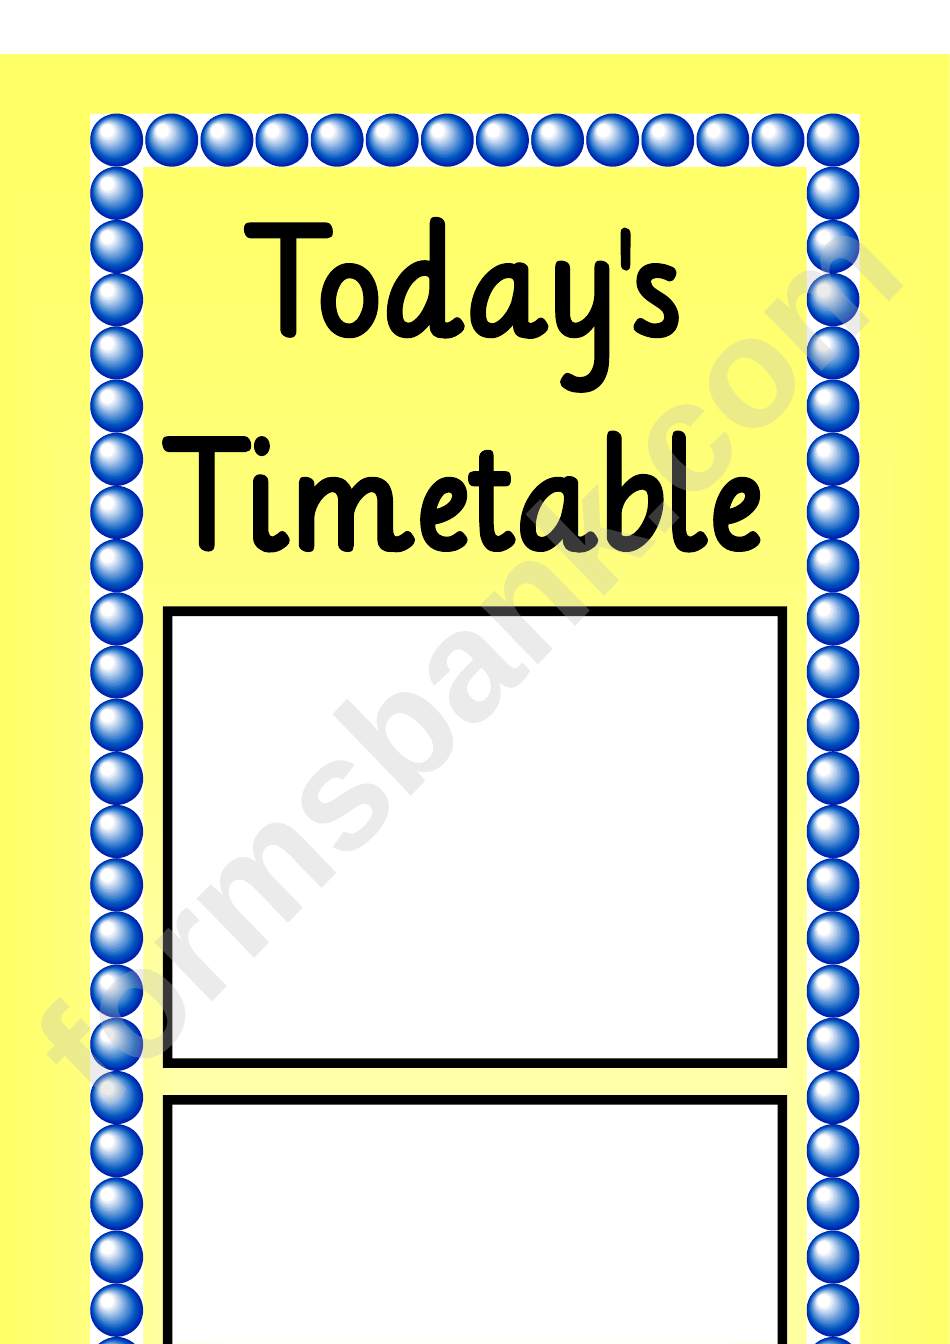 Schedule Template - Today